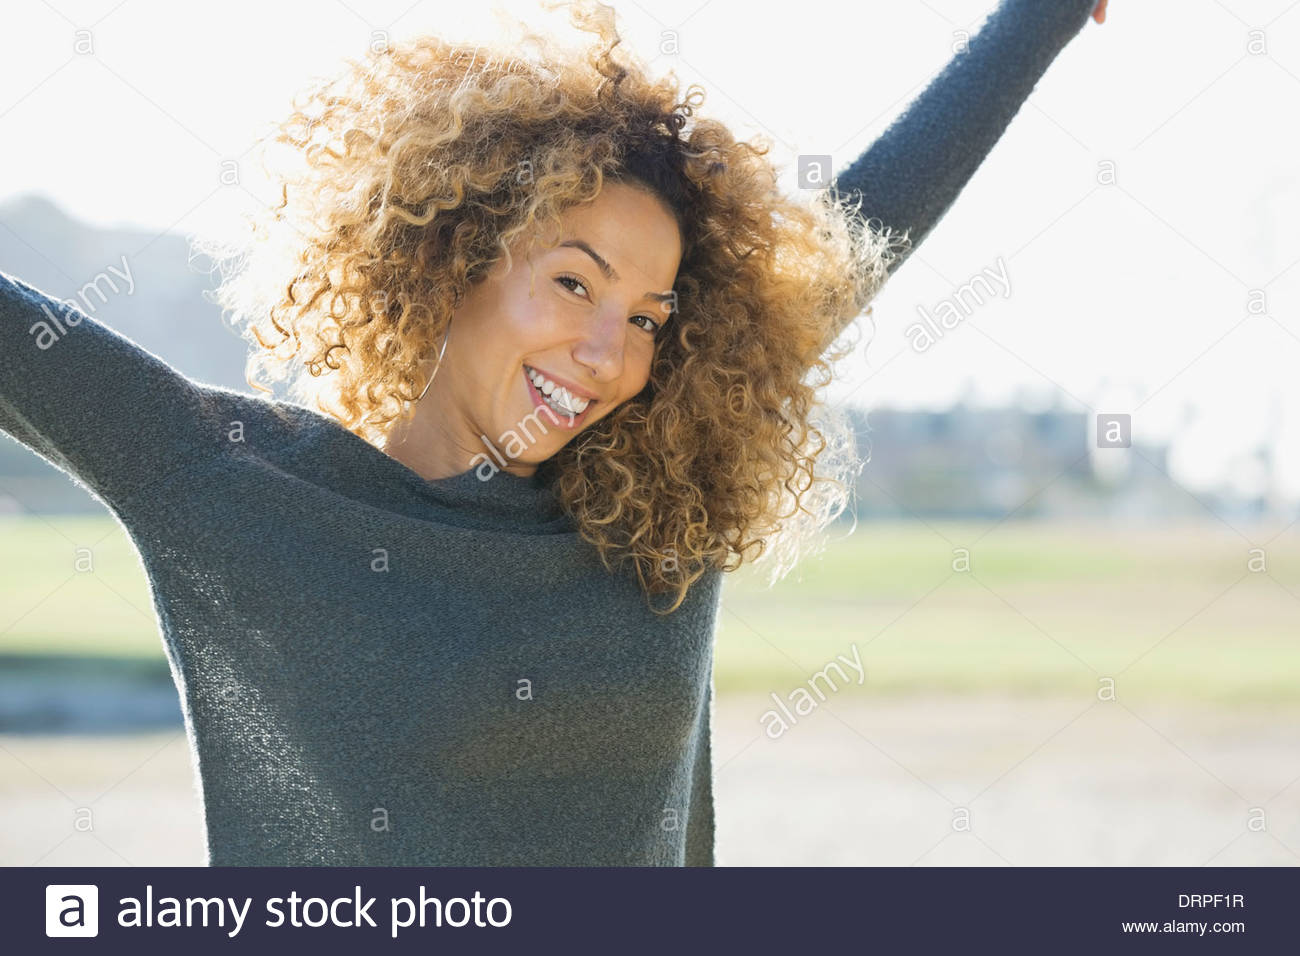 Portrait of woman with arms raised outdoors Stock Photo